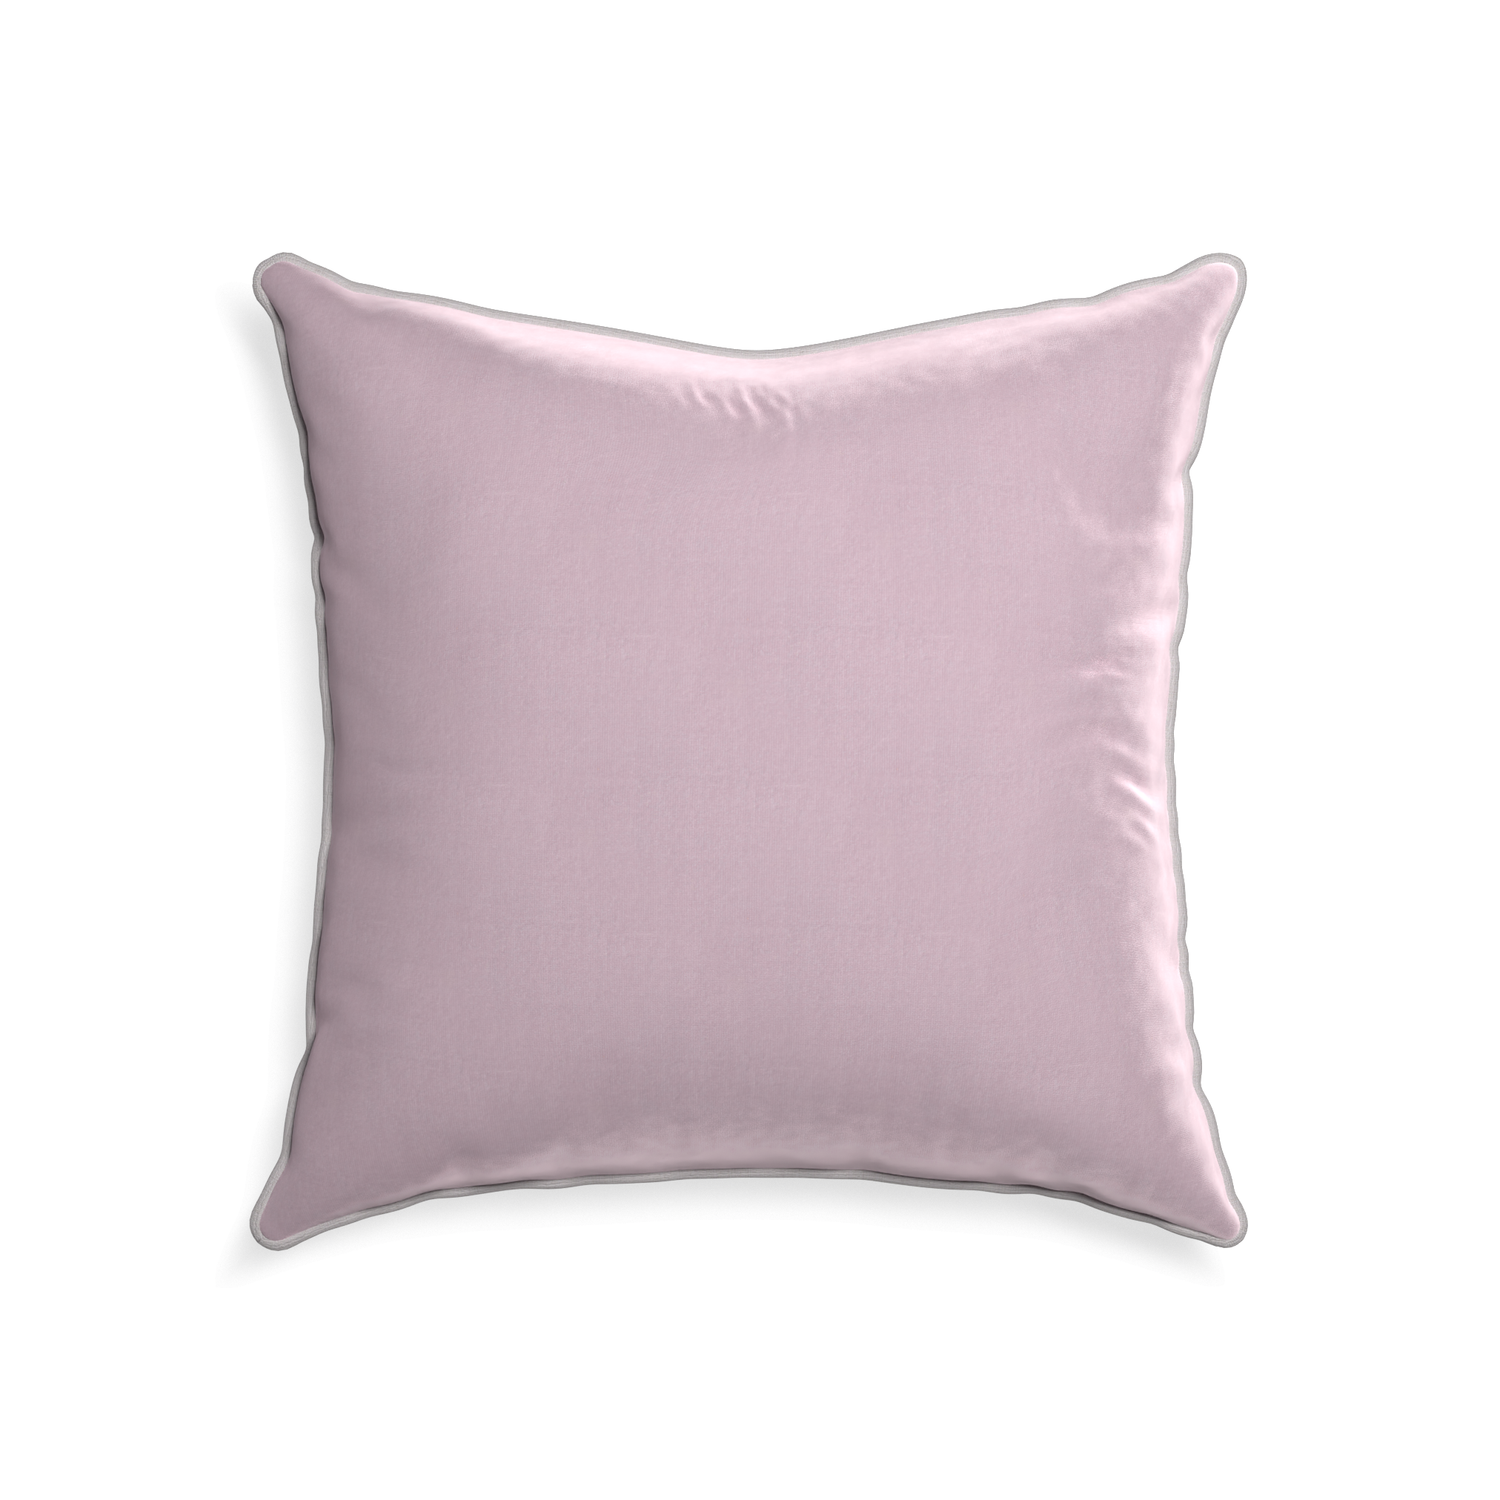 22-square lilac velvet custom pillow with pebble piping on white background